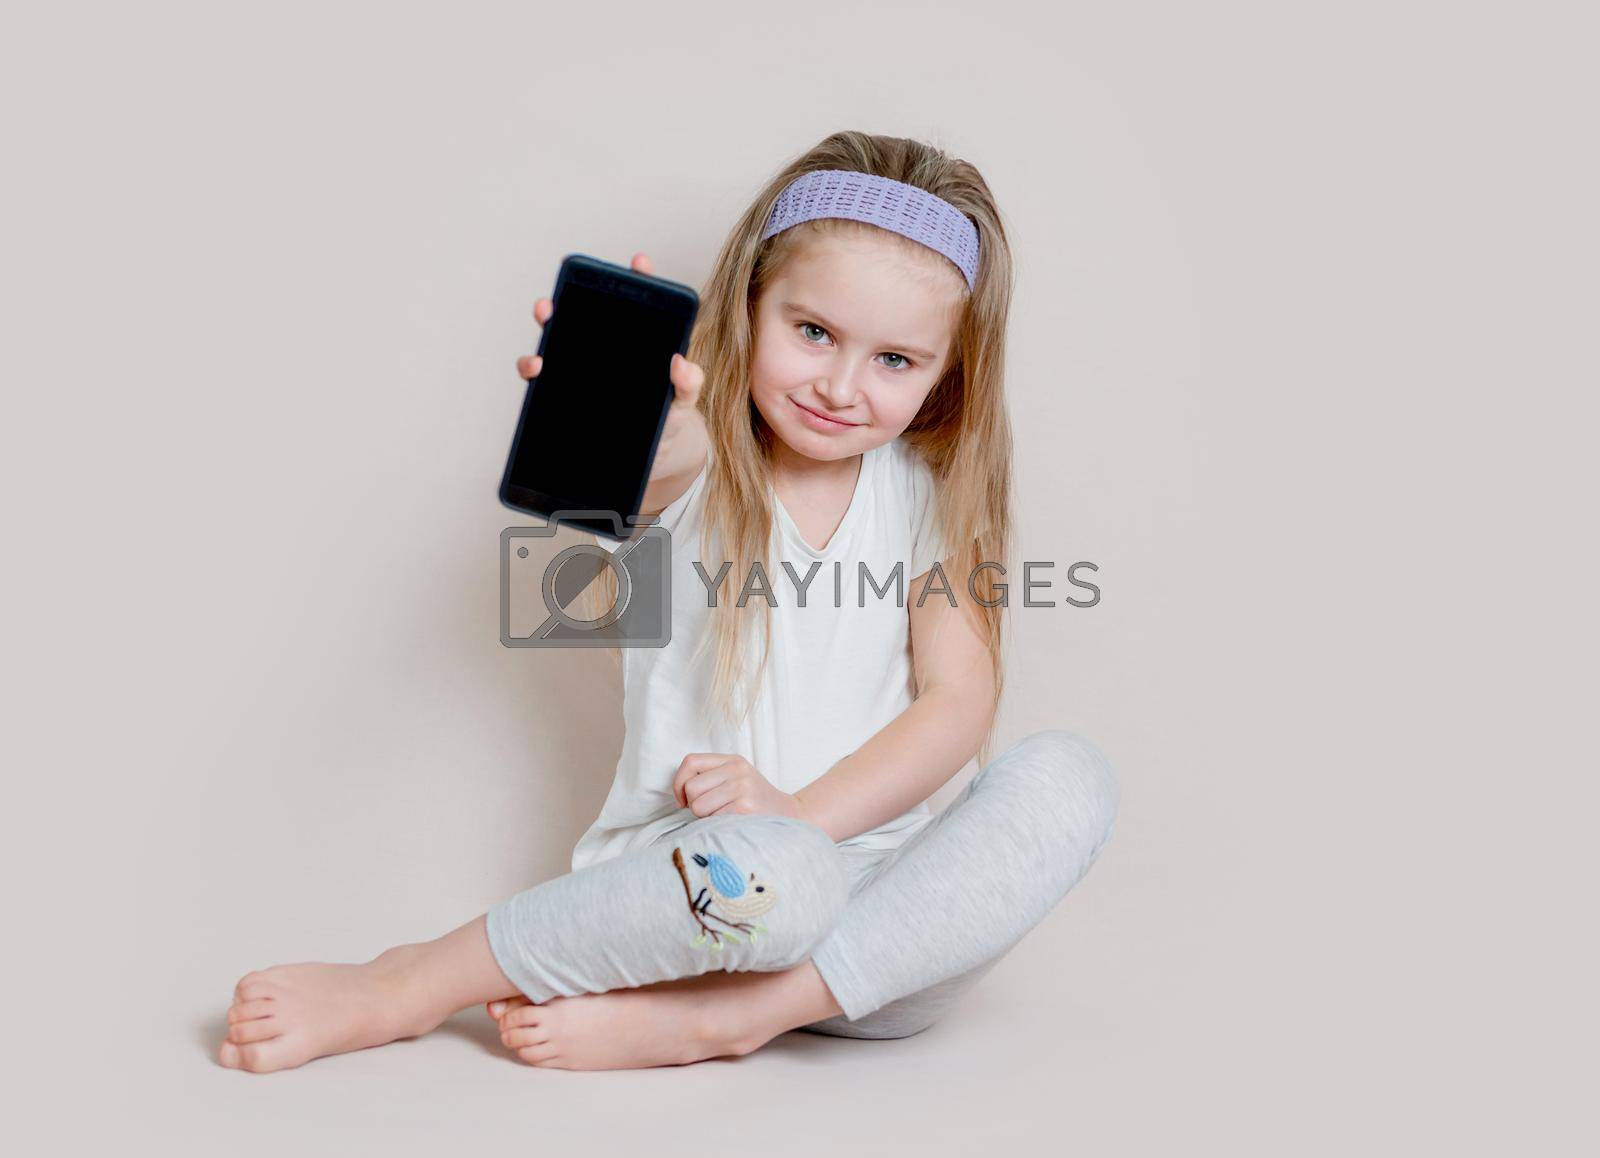 Royalty free image of Little girl showing blank screen of mobile phone by tan4ikk1